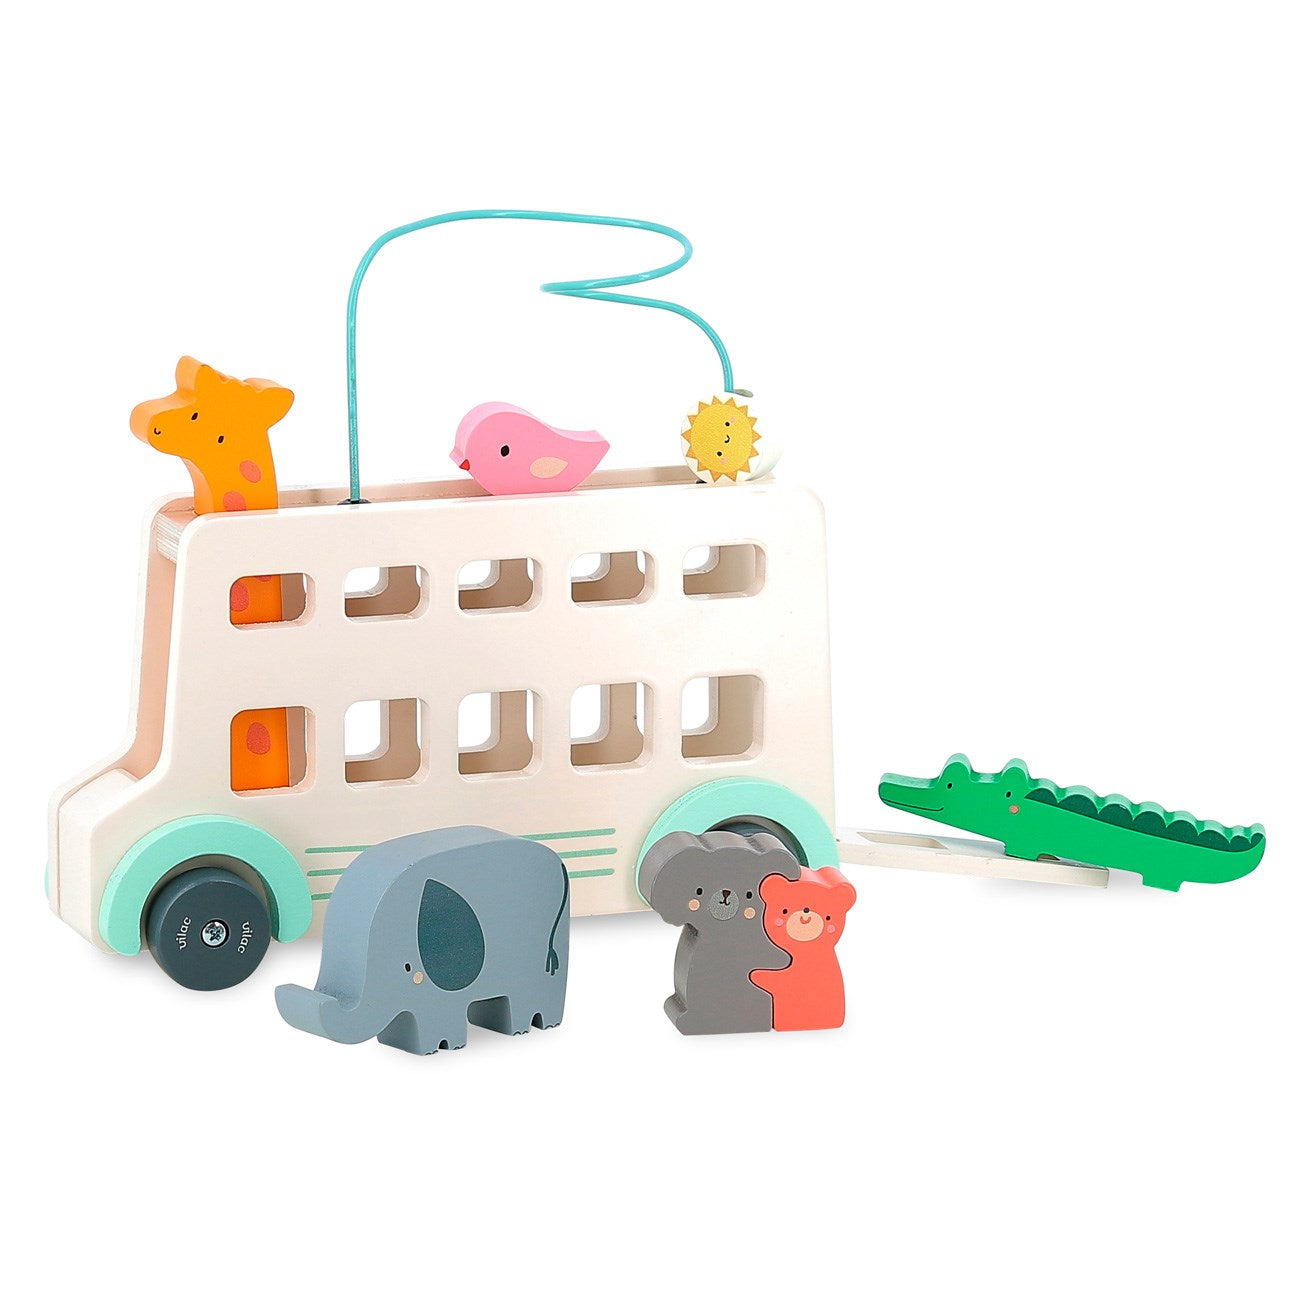 Vilac Activity Play Bus with Animals by Sarah Betz